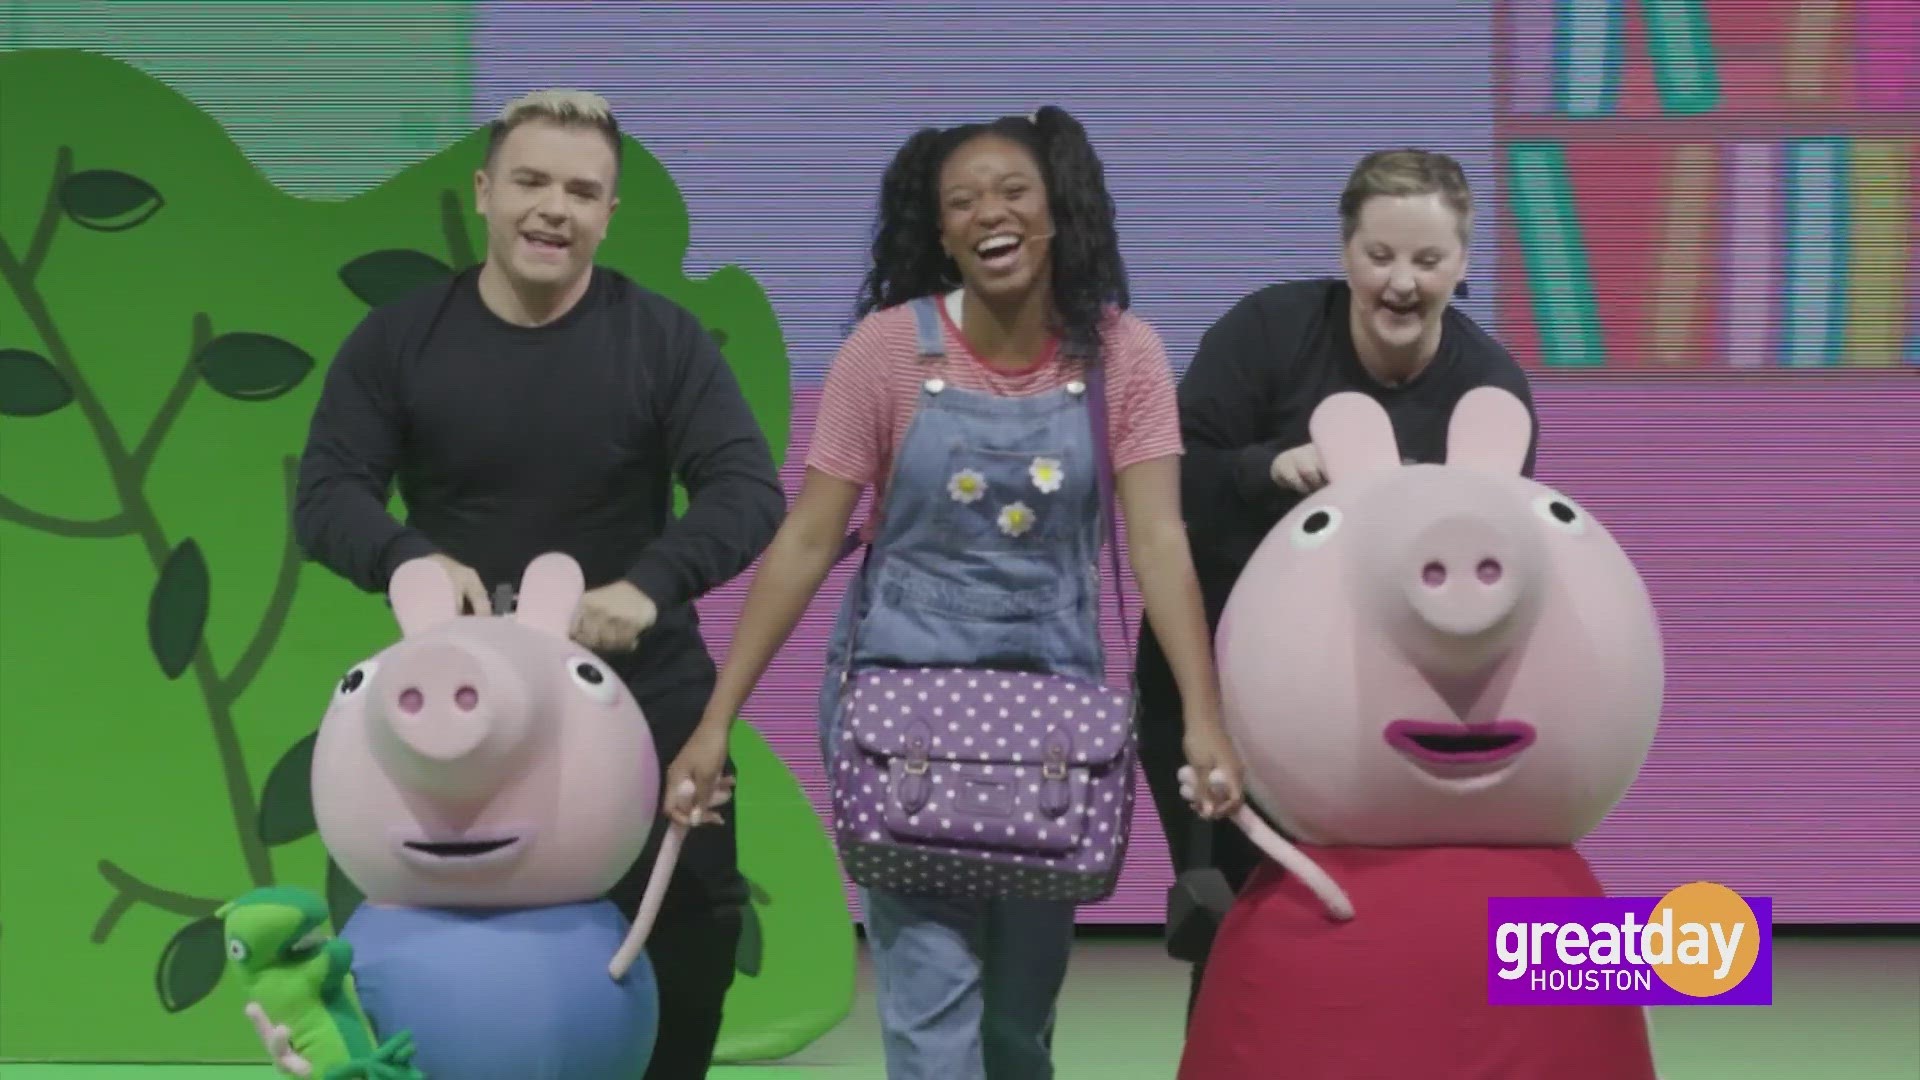 Tour Producer Josh Blackburn shares what to expect at Saturday's thrilling Peppa Pig event